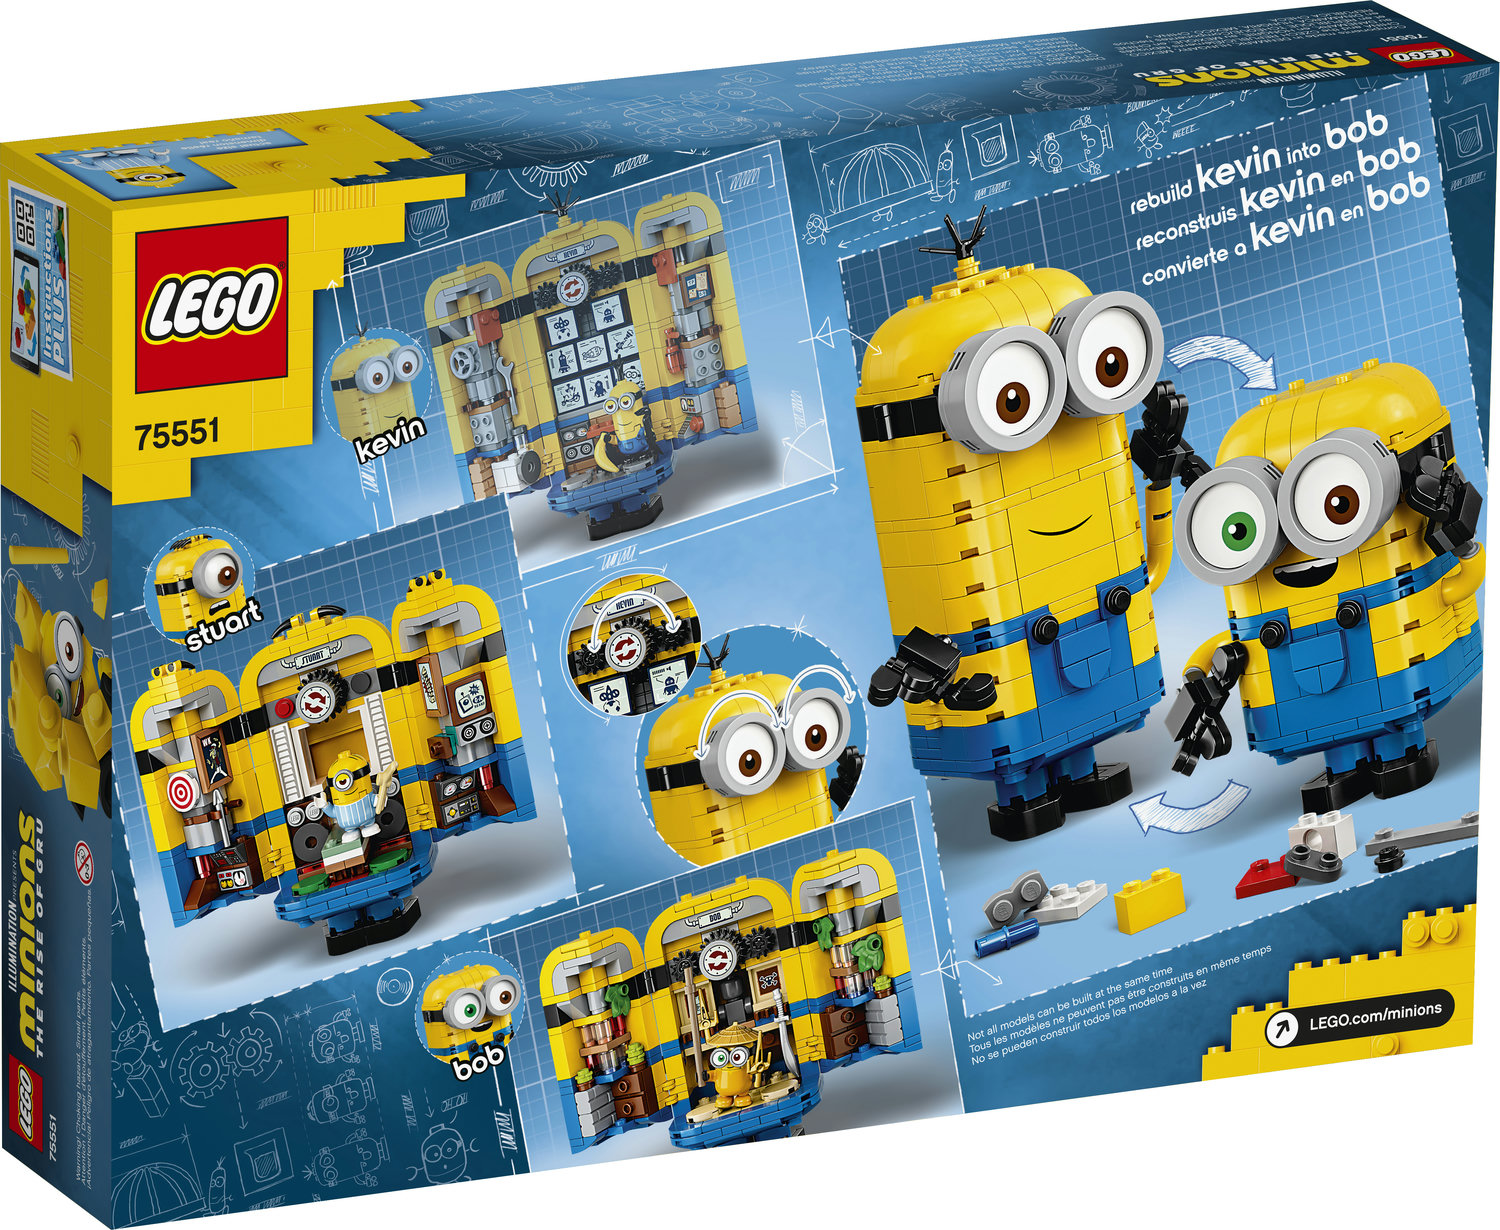 LEGO Minions: Brick-Built Minions and Their Lair (75551) Building Kit for Kids, Great Birthday Present for Kids Who Love Minion Toys and Kevin, Bob and Stuart Minion Characters (876 Pieces) - image 3 of 5